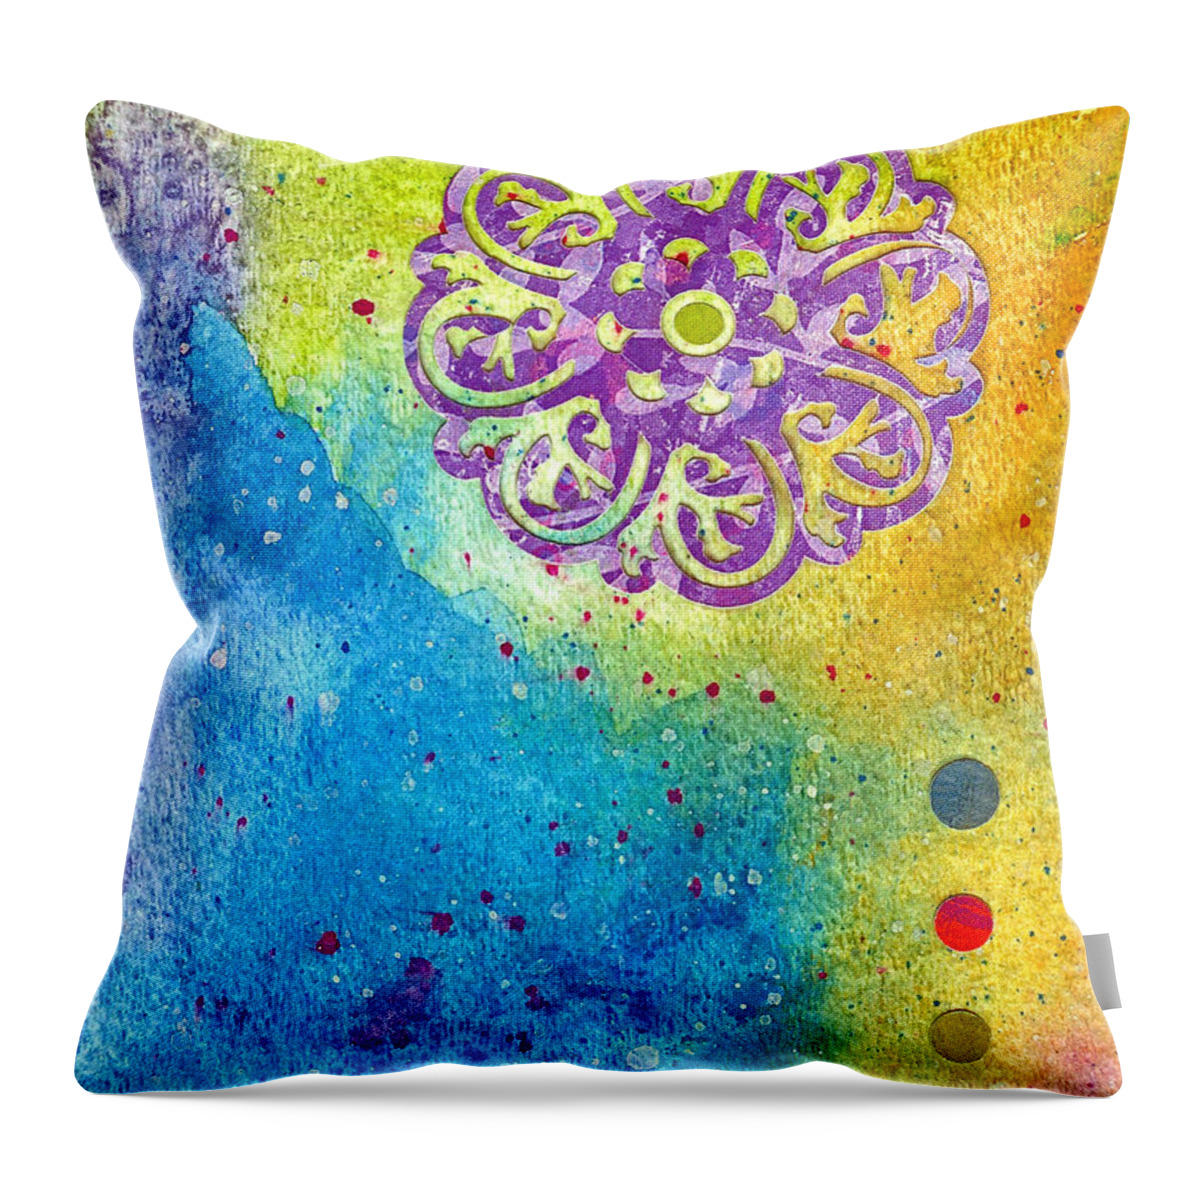 Mixed Media Throw Pillow featuring the painting New Age #7 by Desiree Paquette